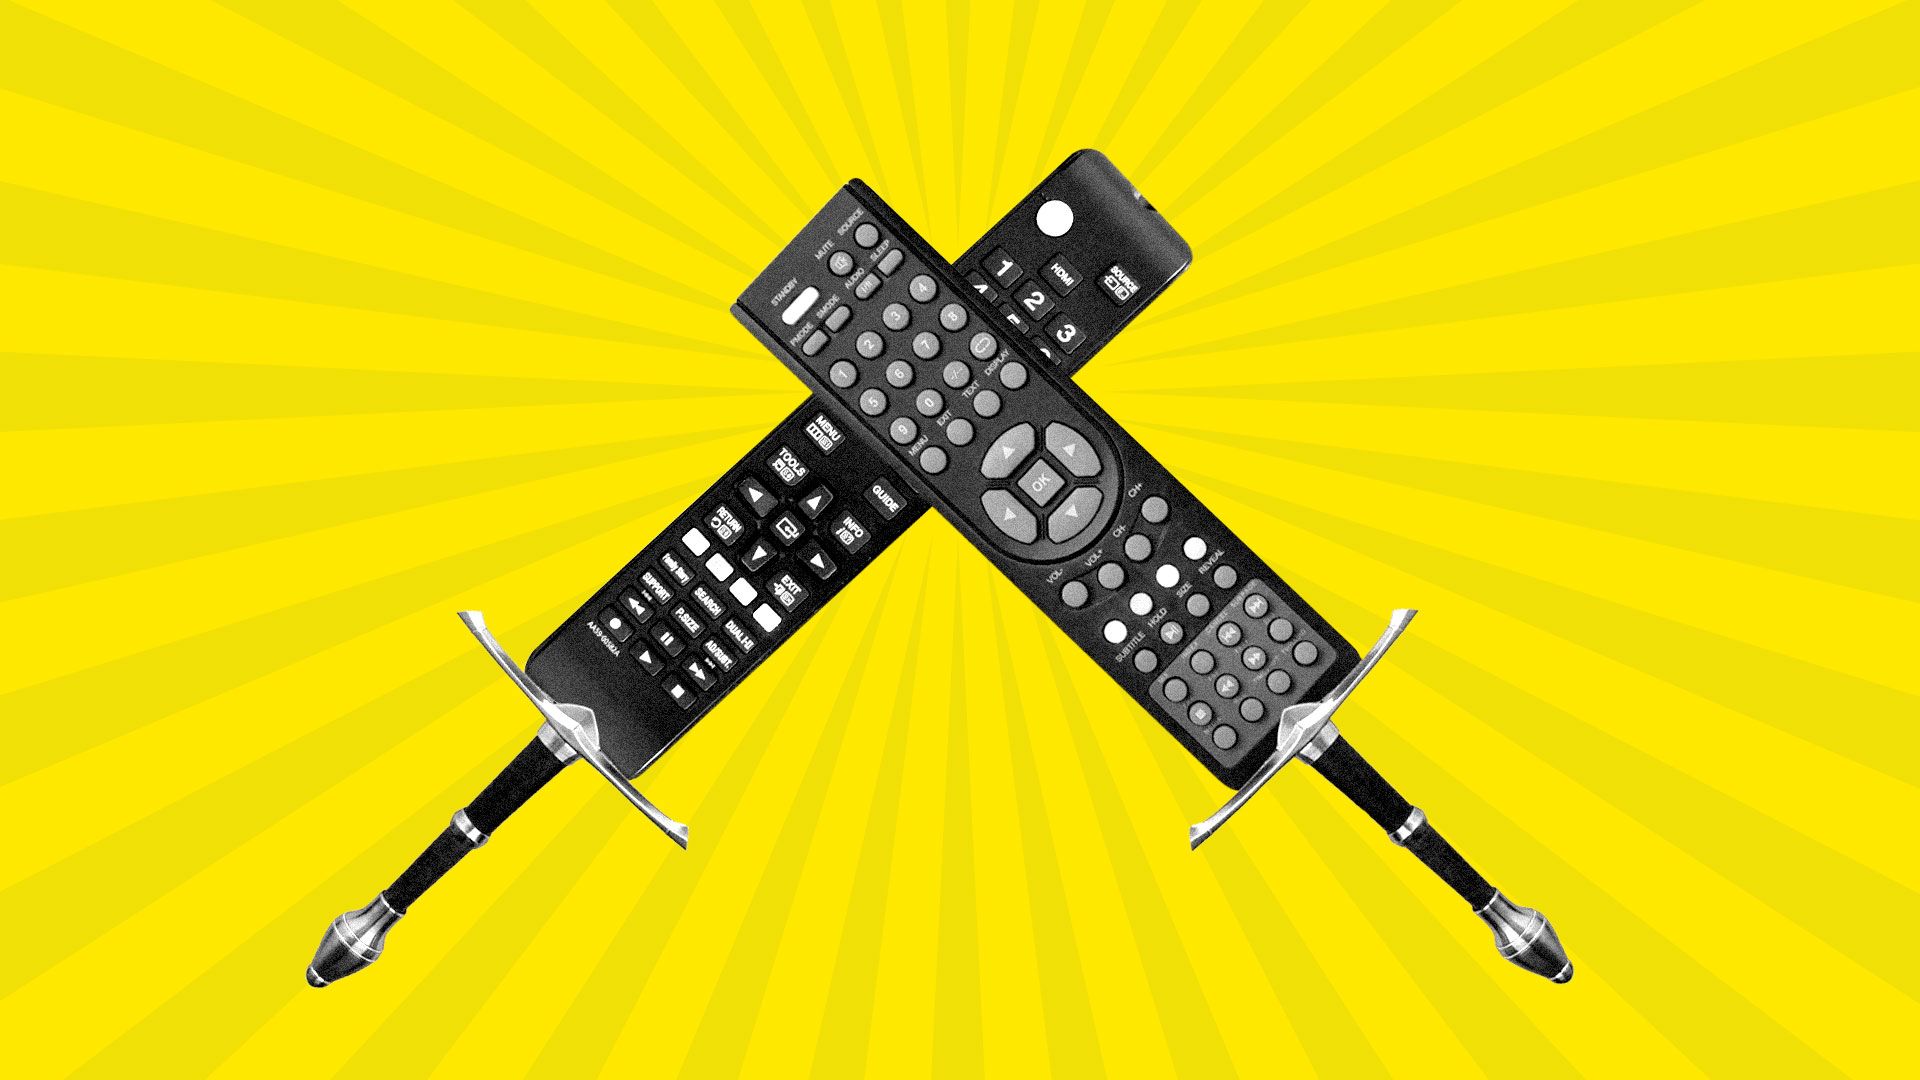  Illustration of two remote controls as swords dueling it out.